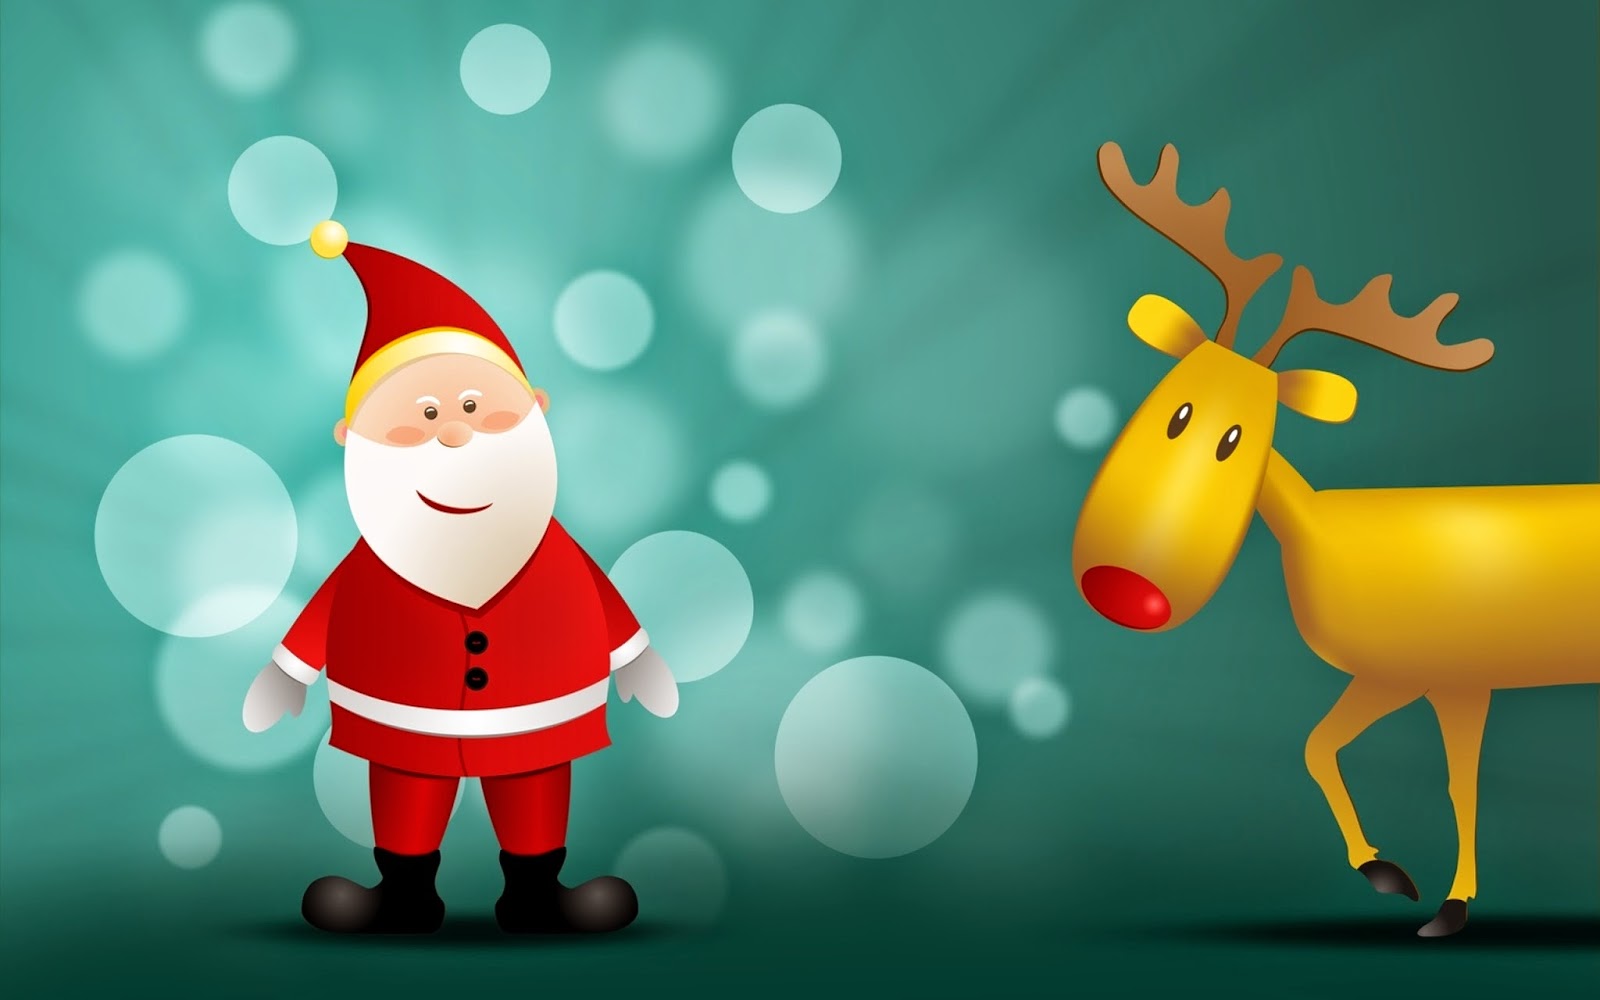 Santa Claus Wallpapers Free Wallpaper - Merry Christmas And Happy New Year 2020 - HD Wallpaper 